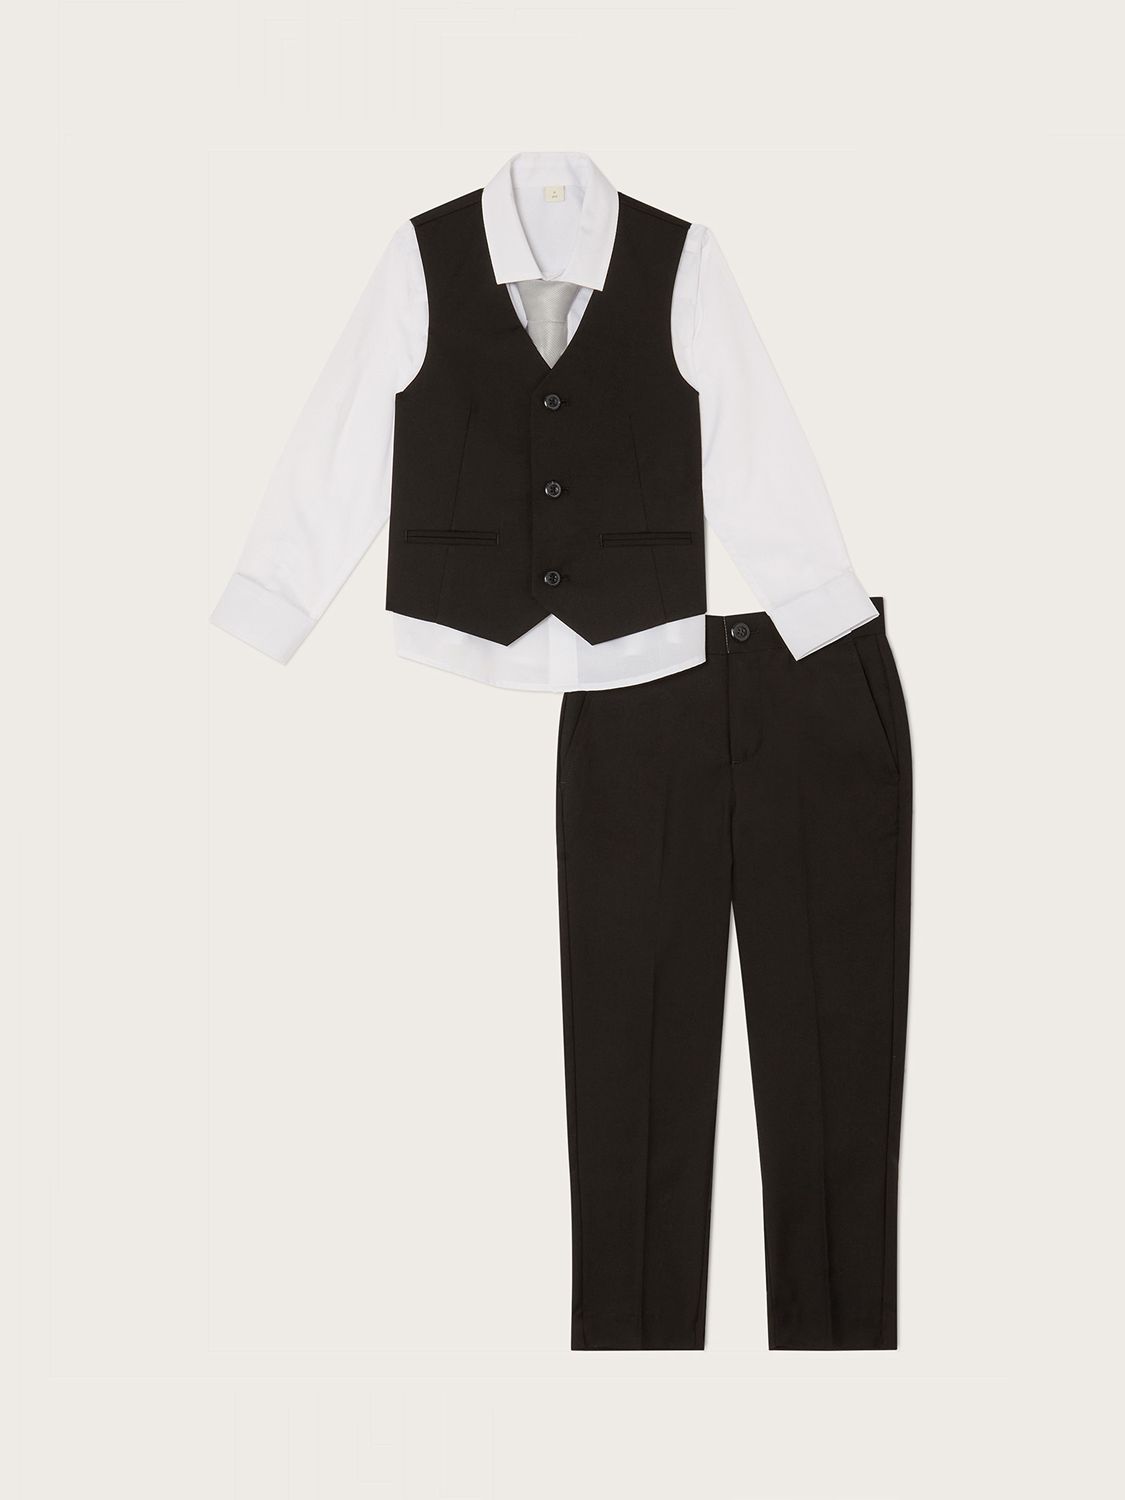 Monsoon Kids' Andrew Four Piece Suit, Black, 2-3 years